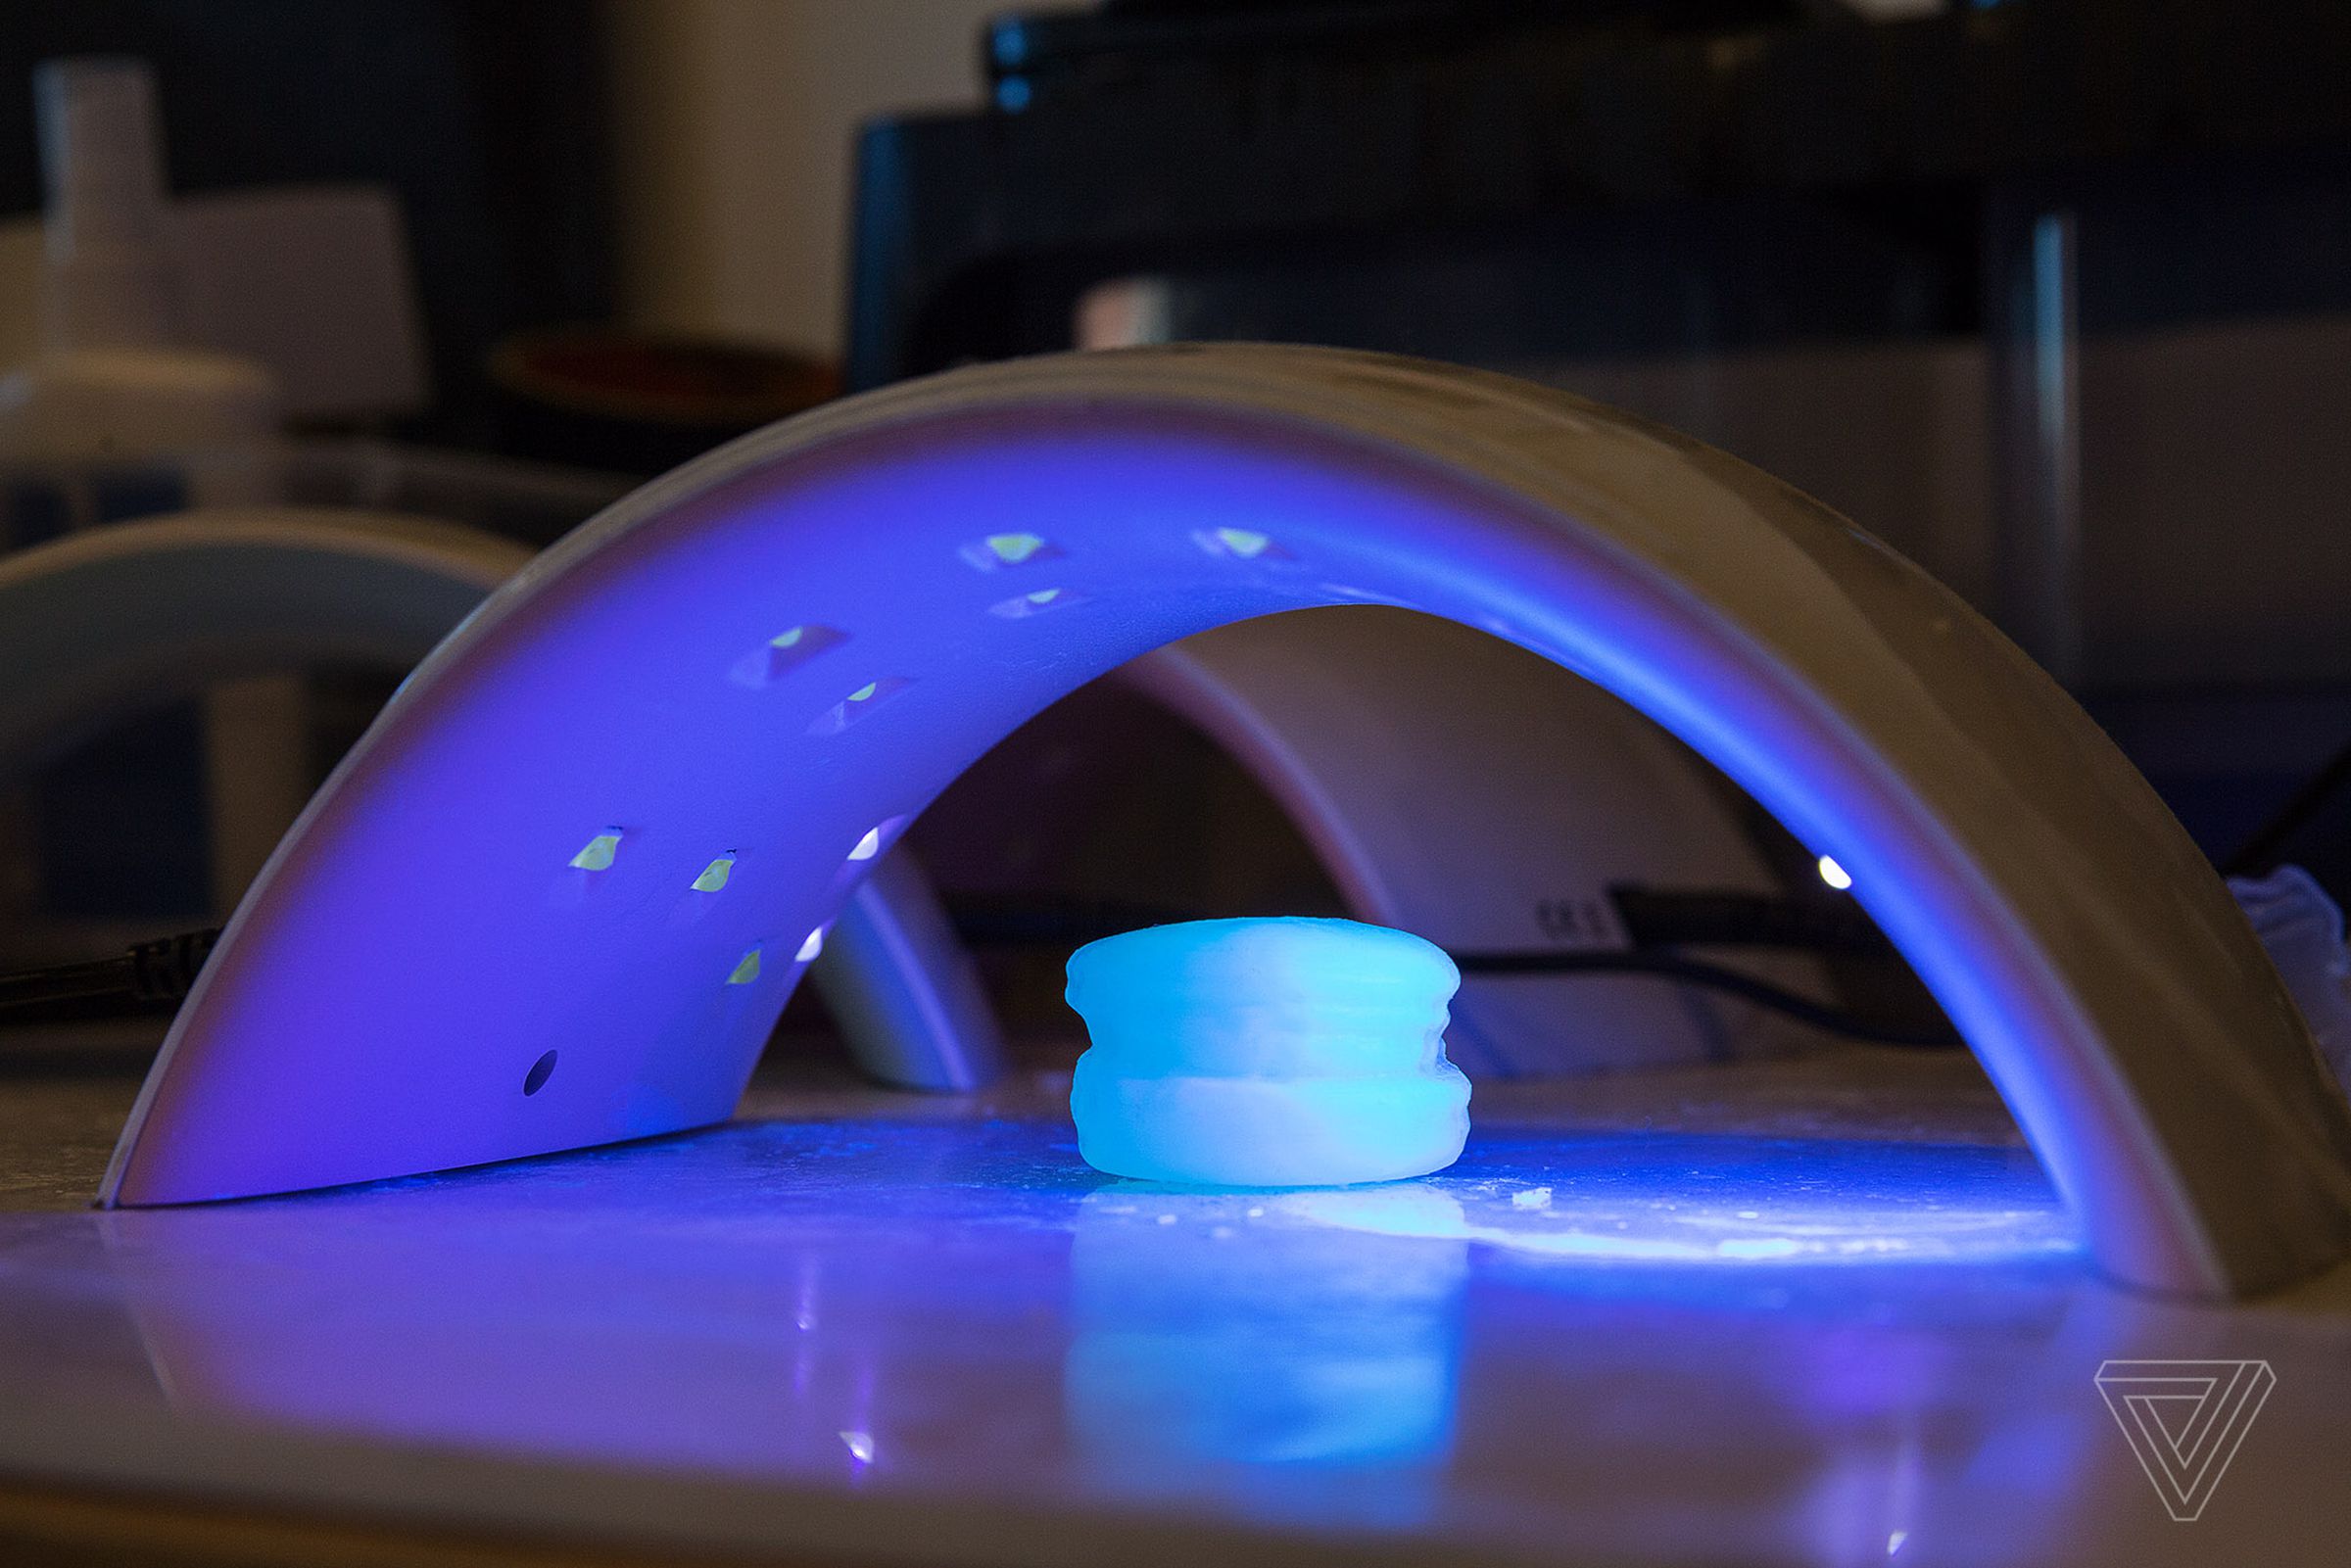 The completed 3D-printed object sits under UV light to harden.